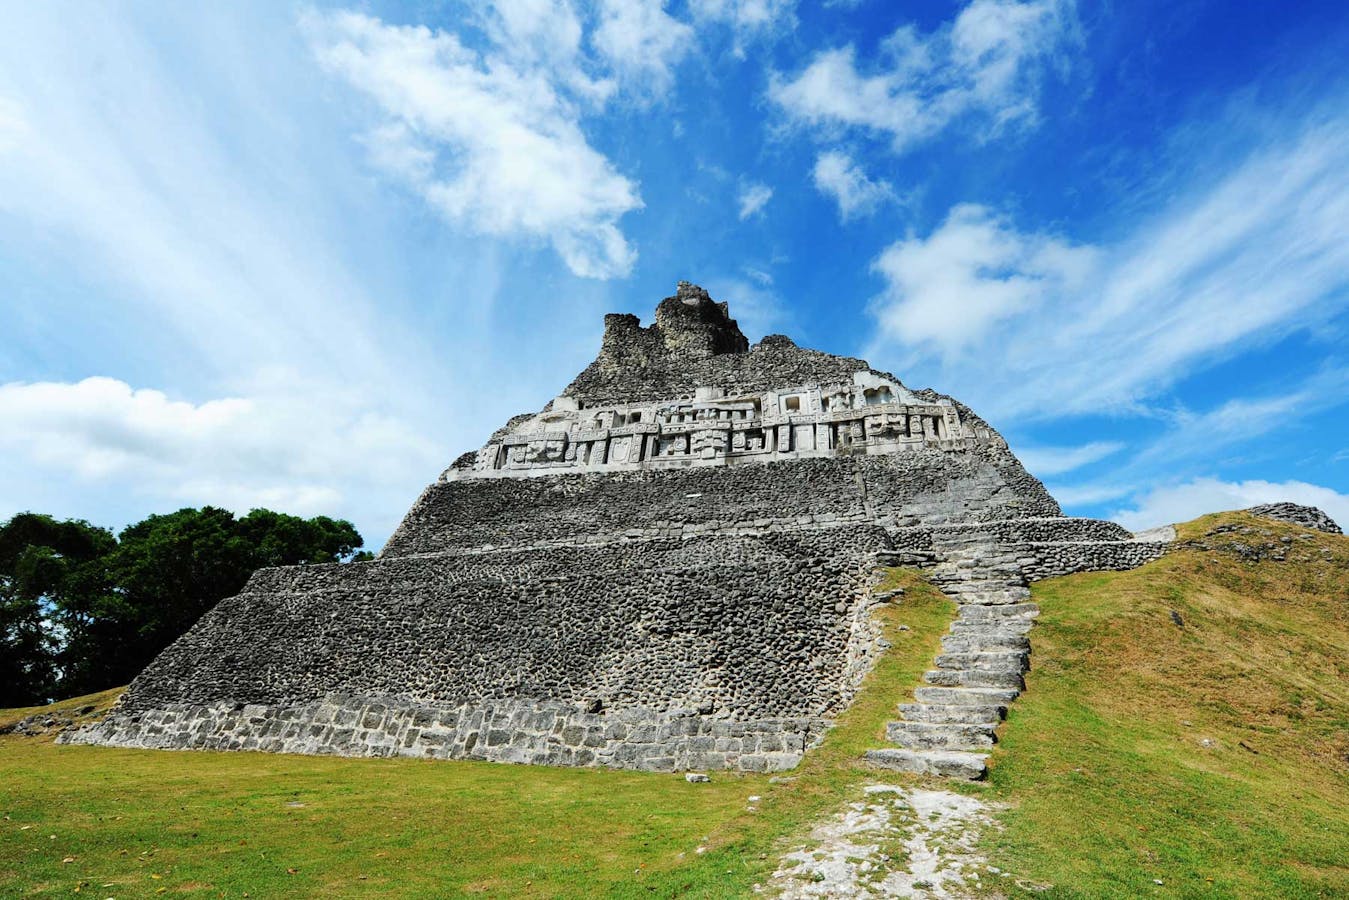 Private tours in Belize